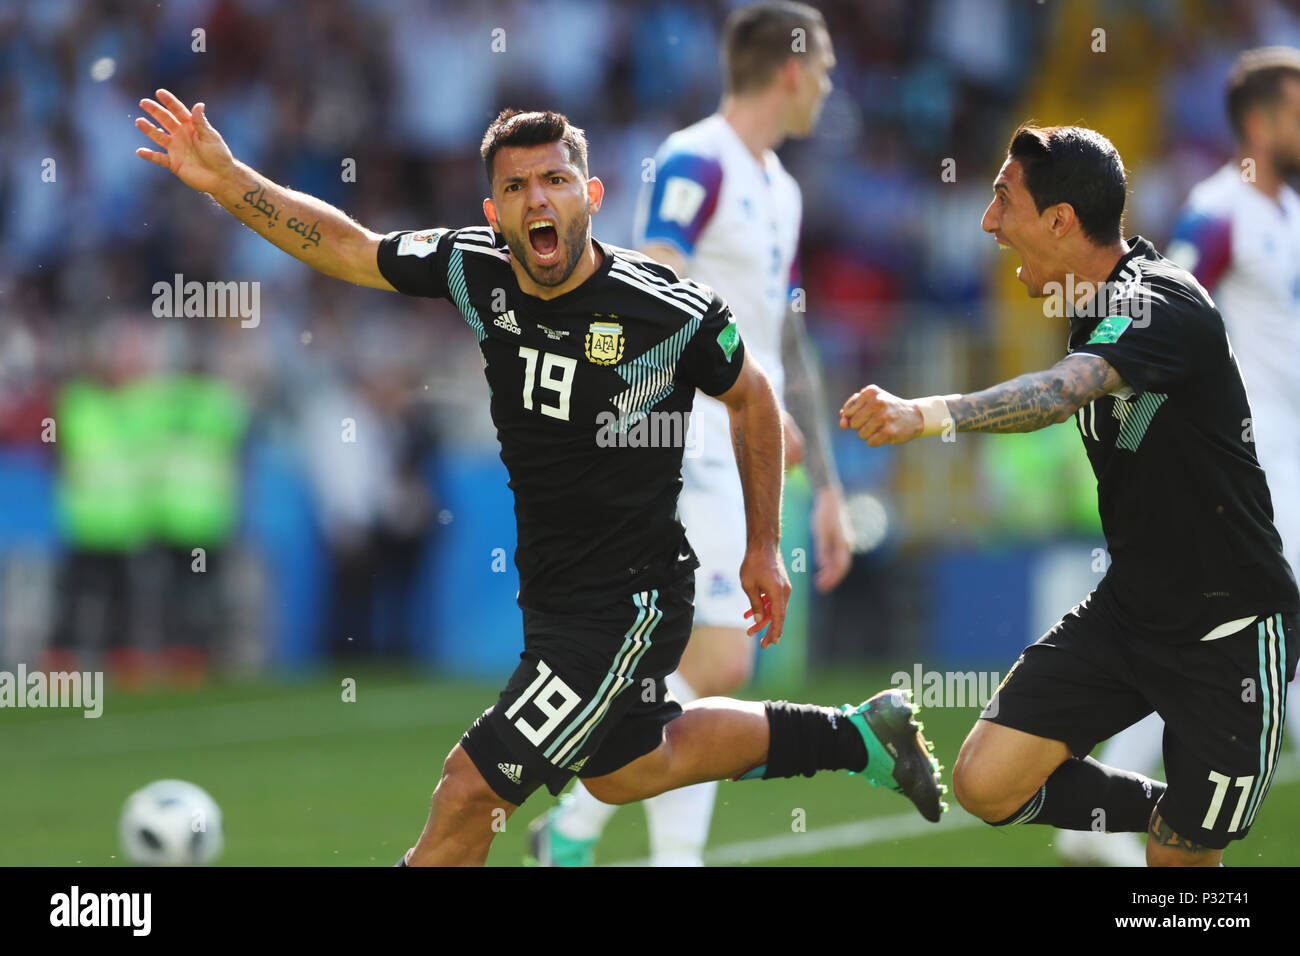 Moscow, Russia. 16th June, 2018. (L-R) Sergio Aguero, Angel Di Maria (ARG) Football/Soccer : FIFA World Cup Russia 2018 Group D match between Argentina 1-1 Iceland at Spartak Stadium in Moscow, Russia . Credit: Yohei Osada/AFLO SPORT/Alamy Live News Stock Photo